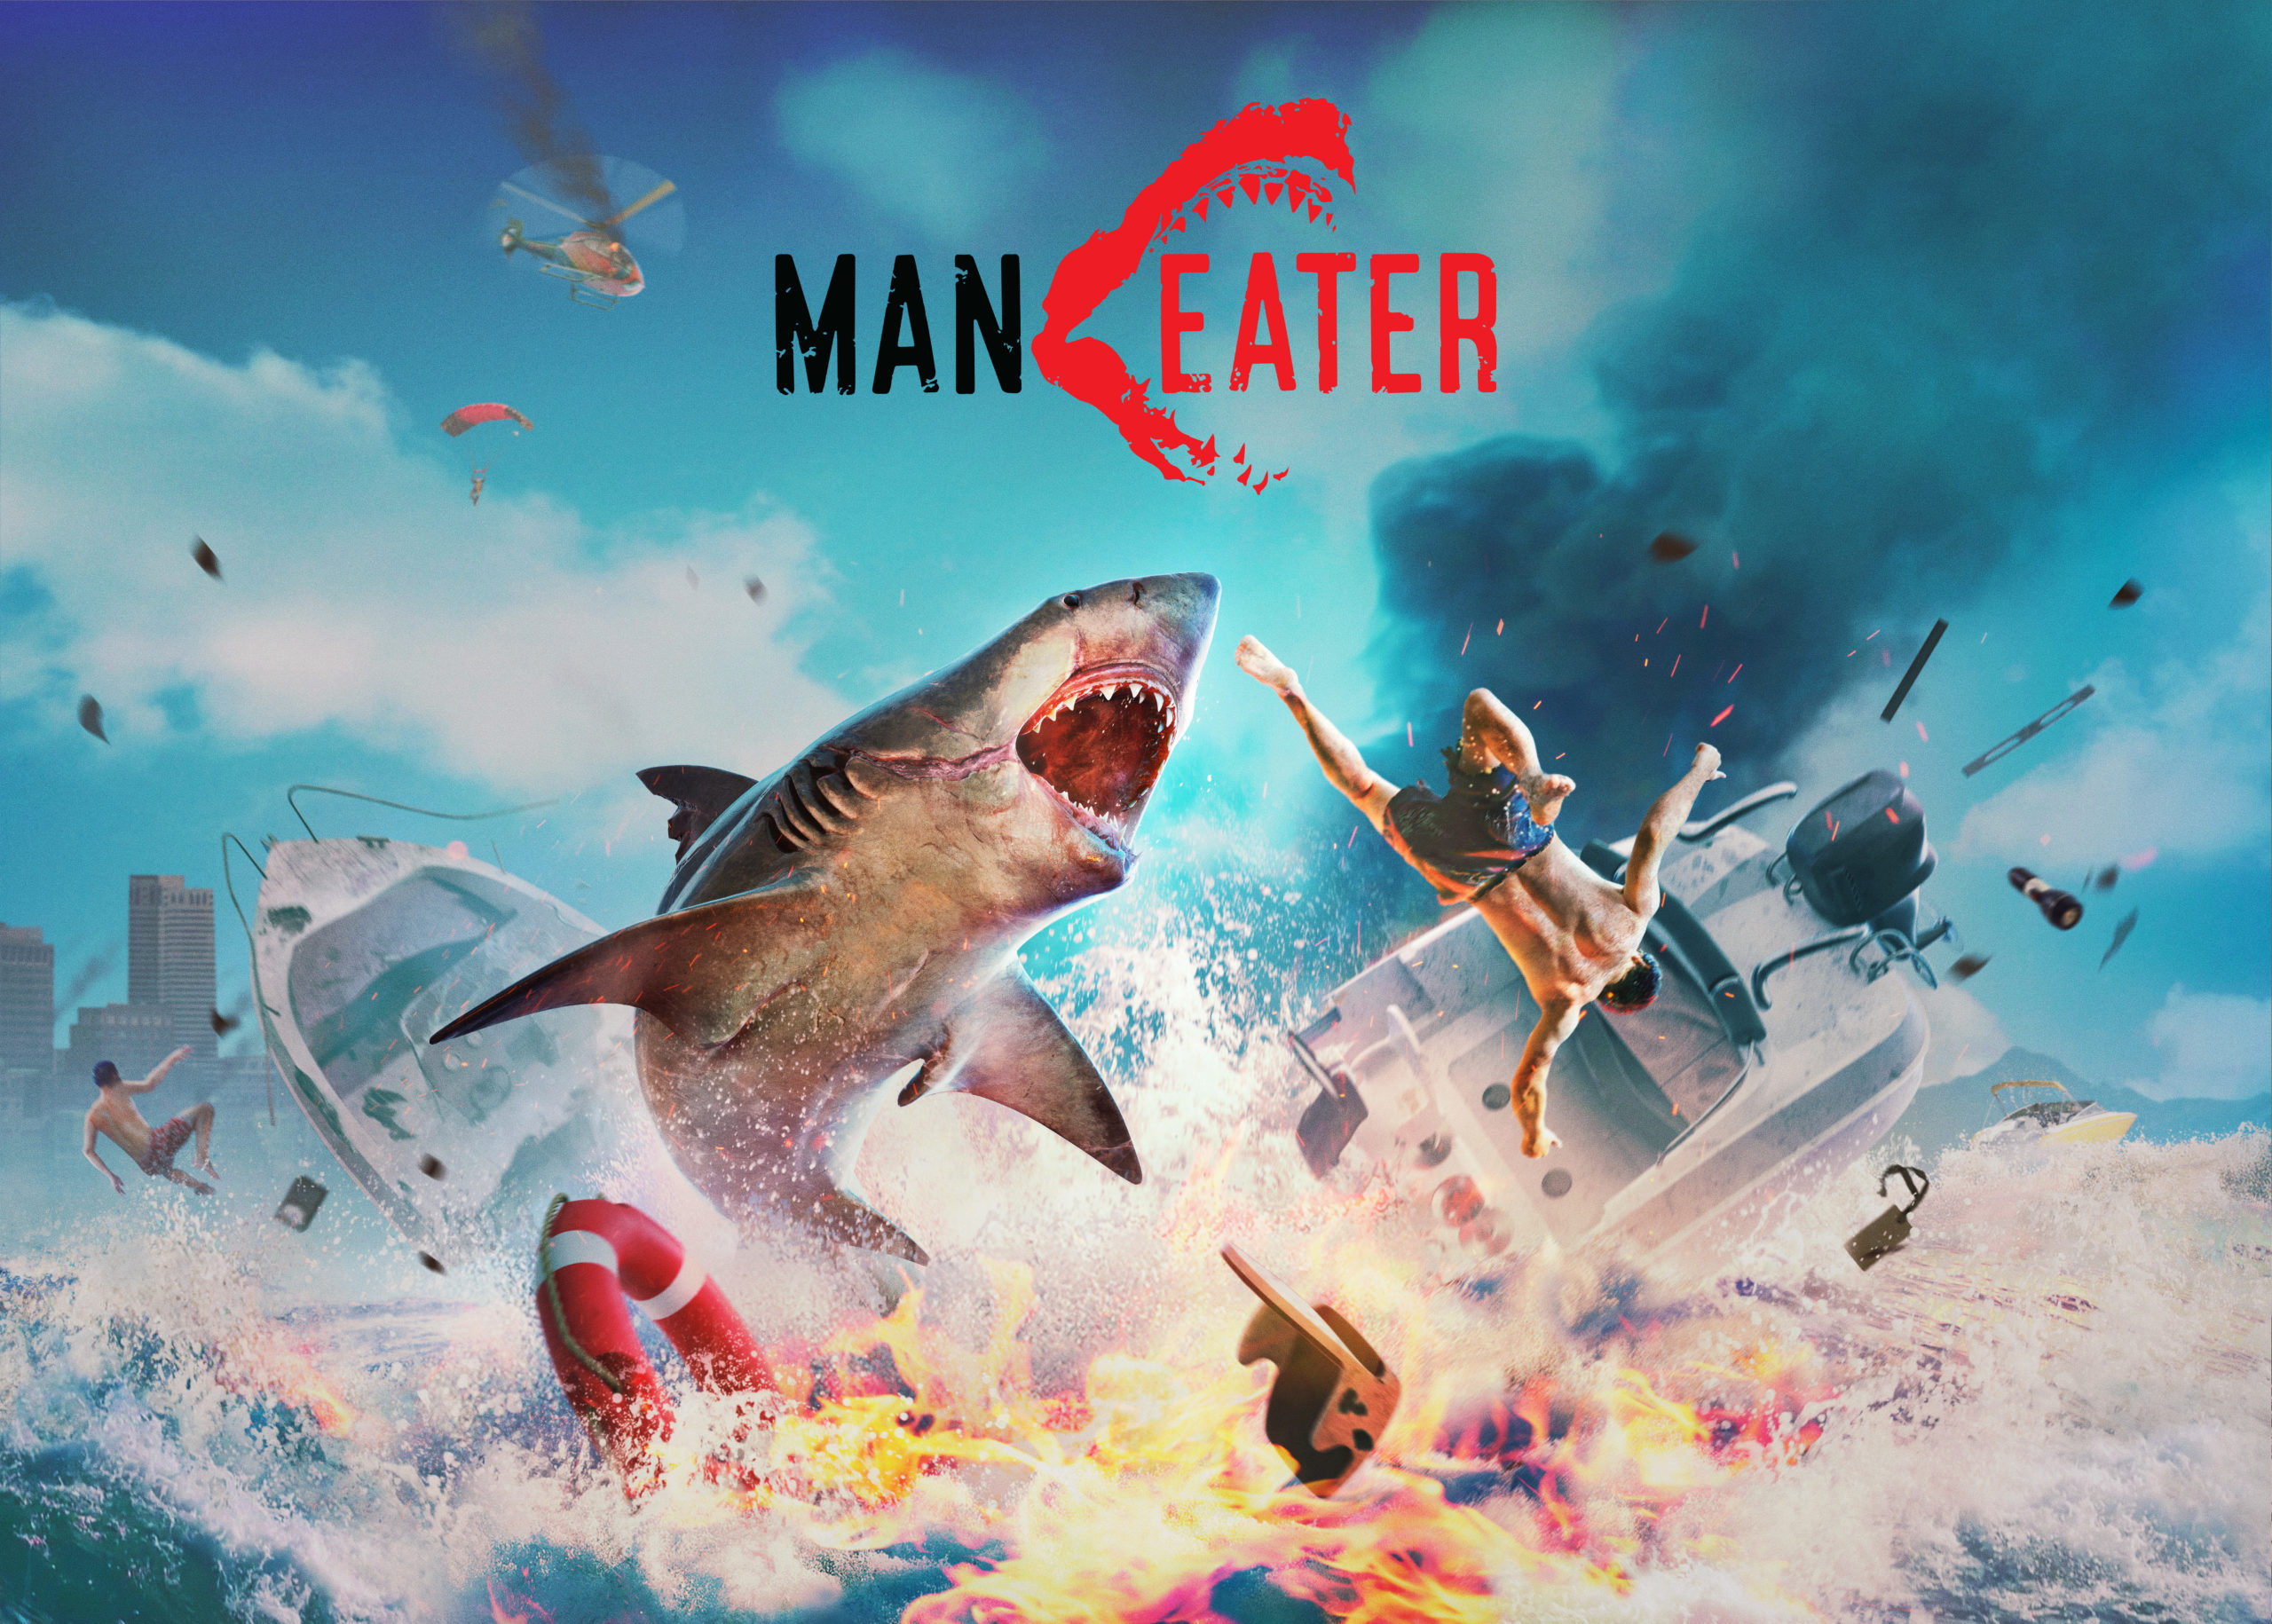 Maneater: How a shark becomes the star of a role-playing game